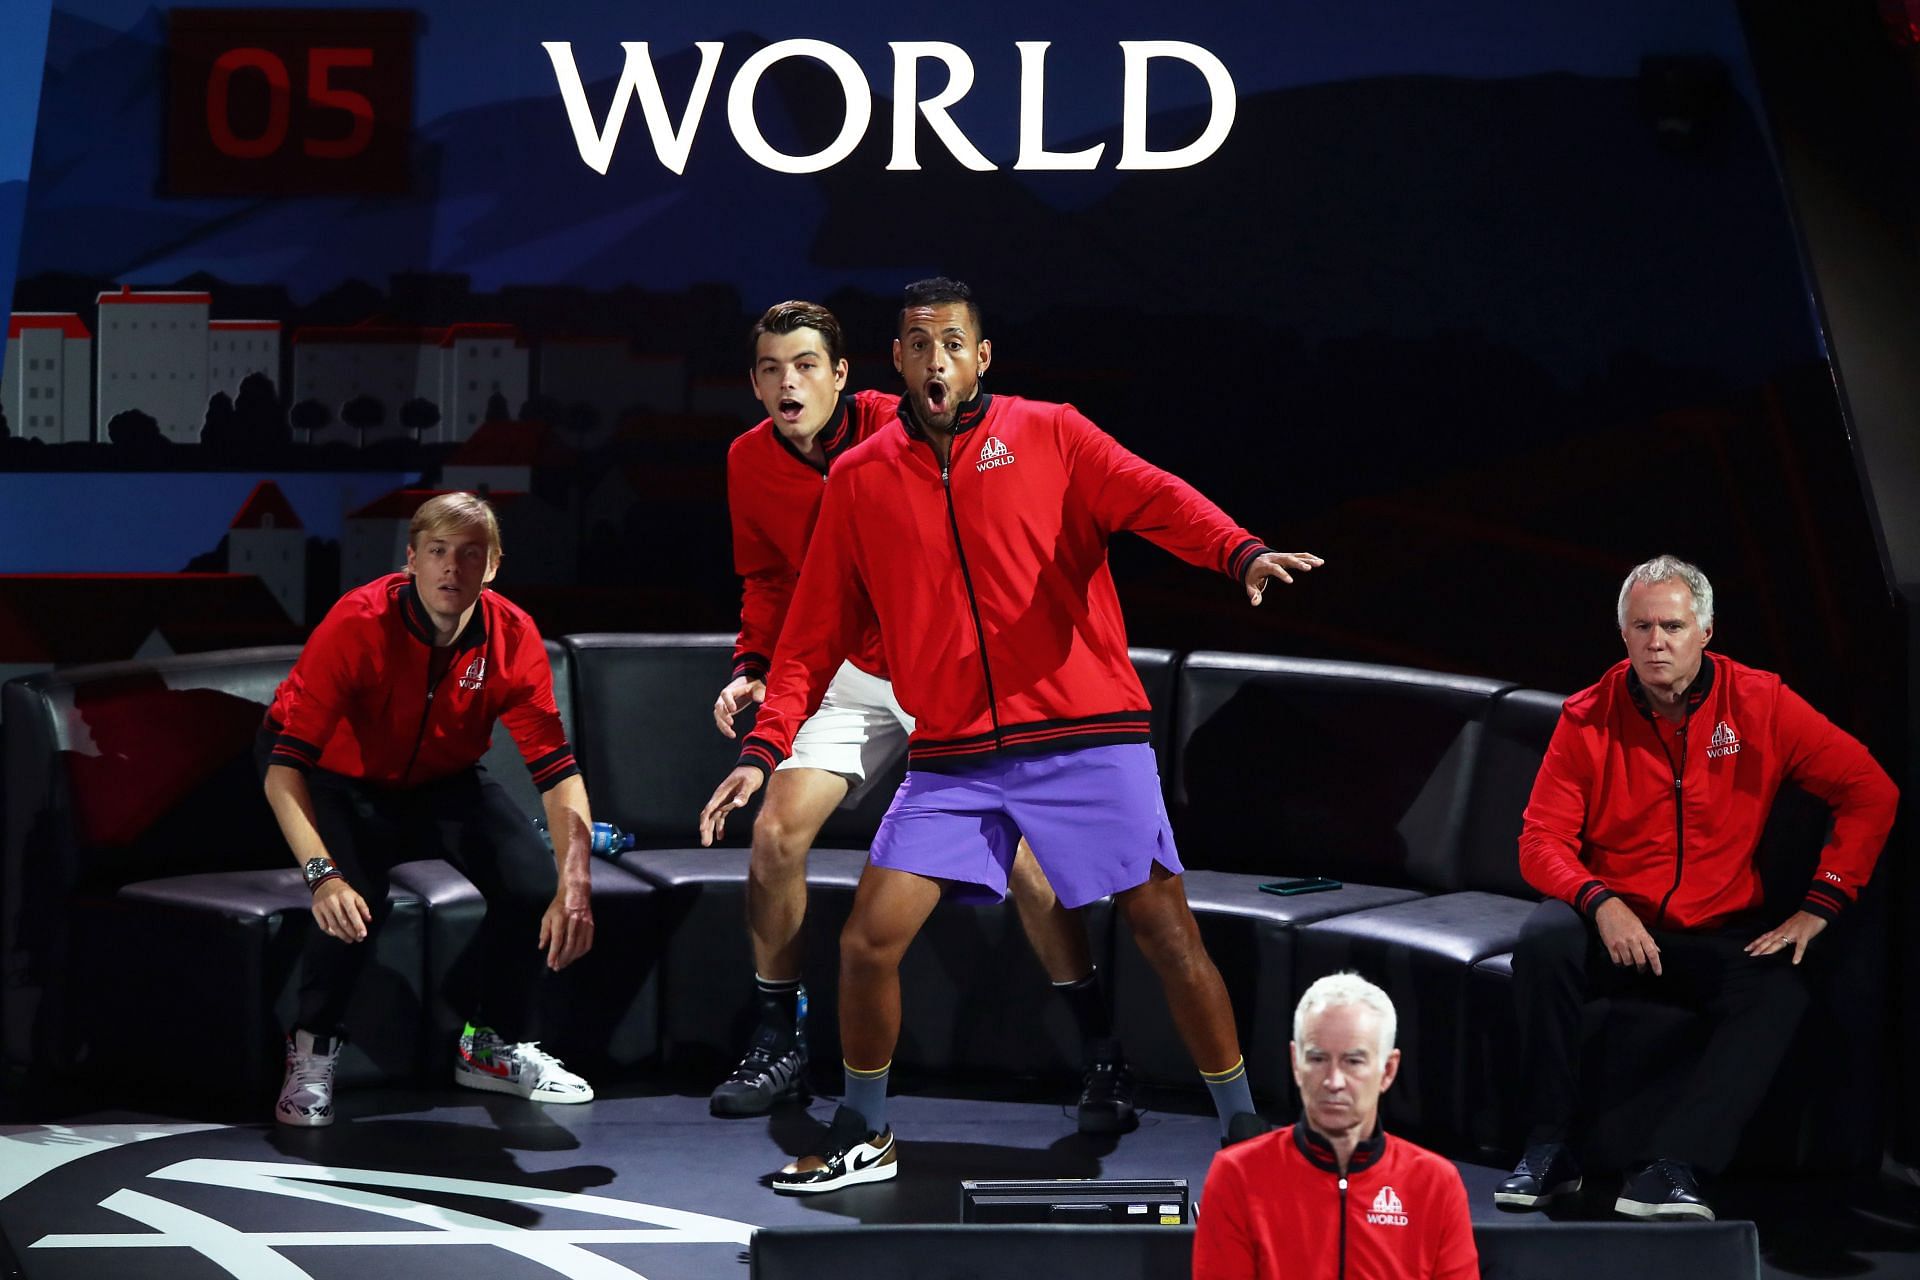 Nick Kyrgios with Team World at the Laver Cup 2019